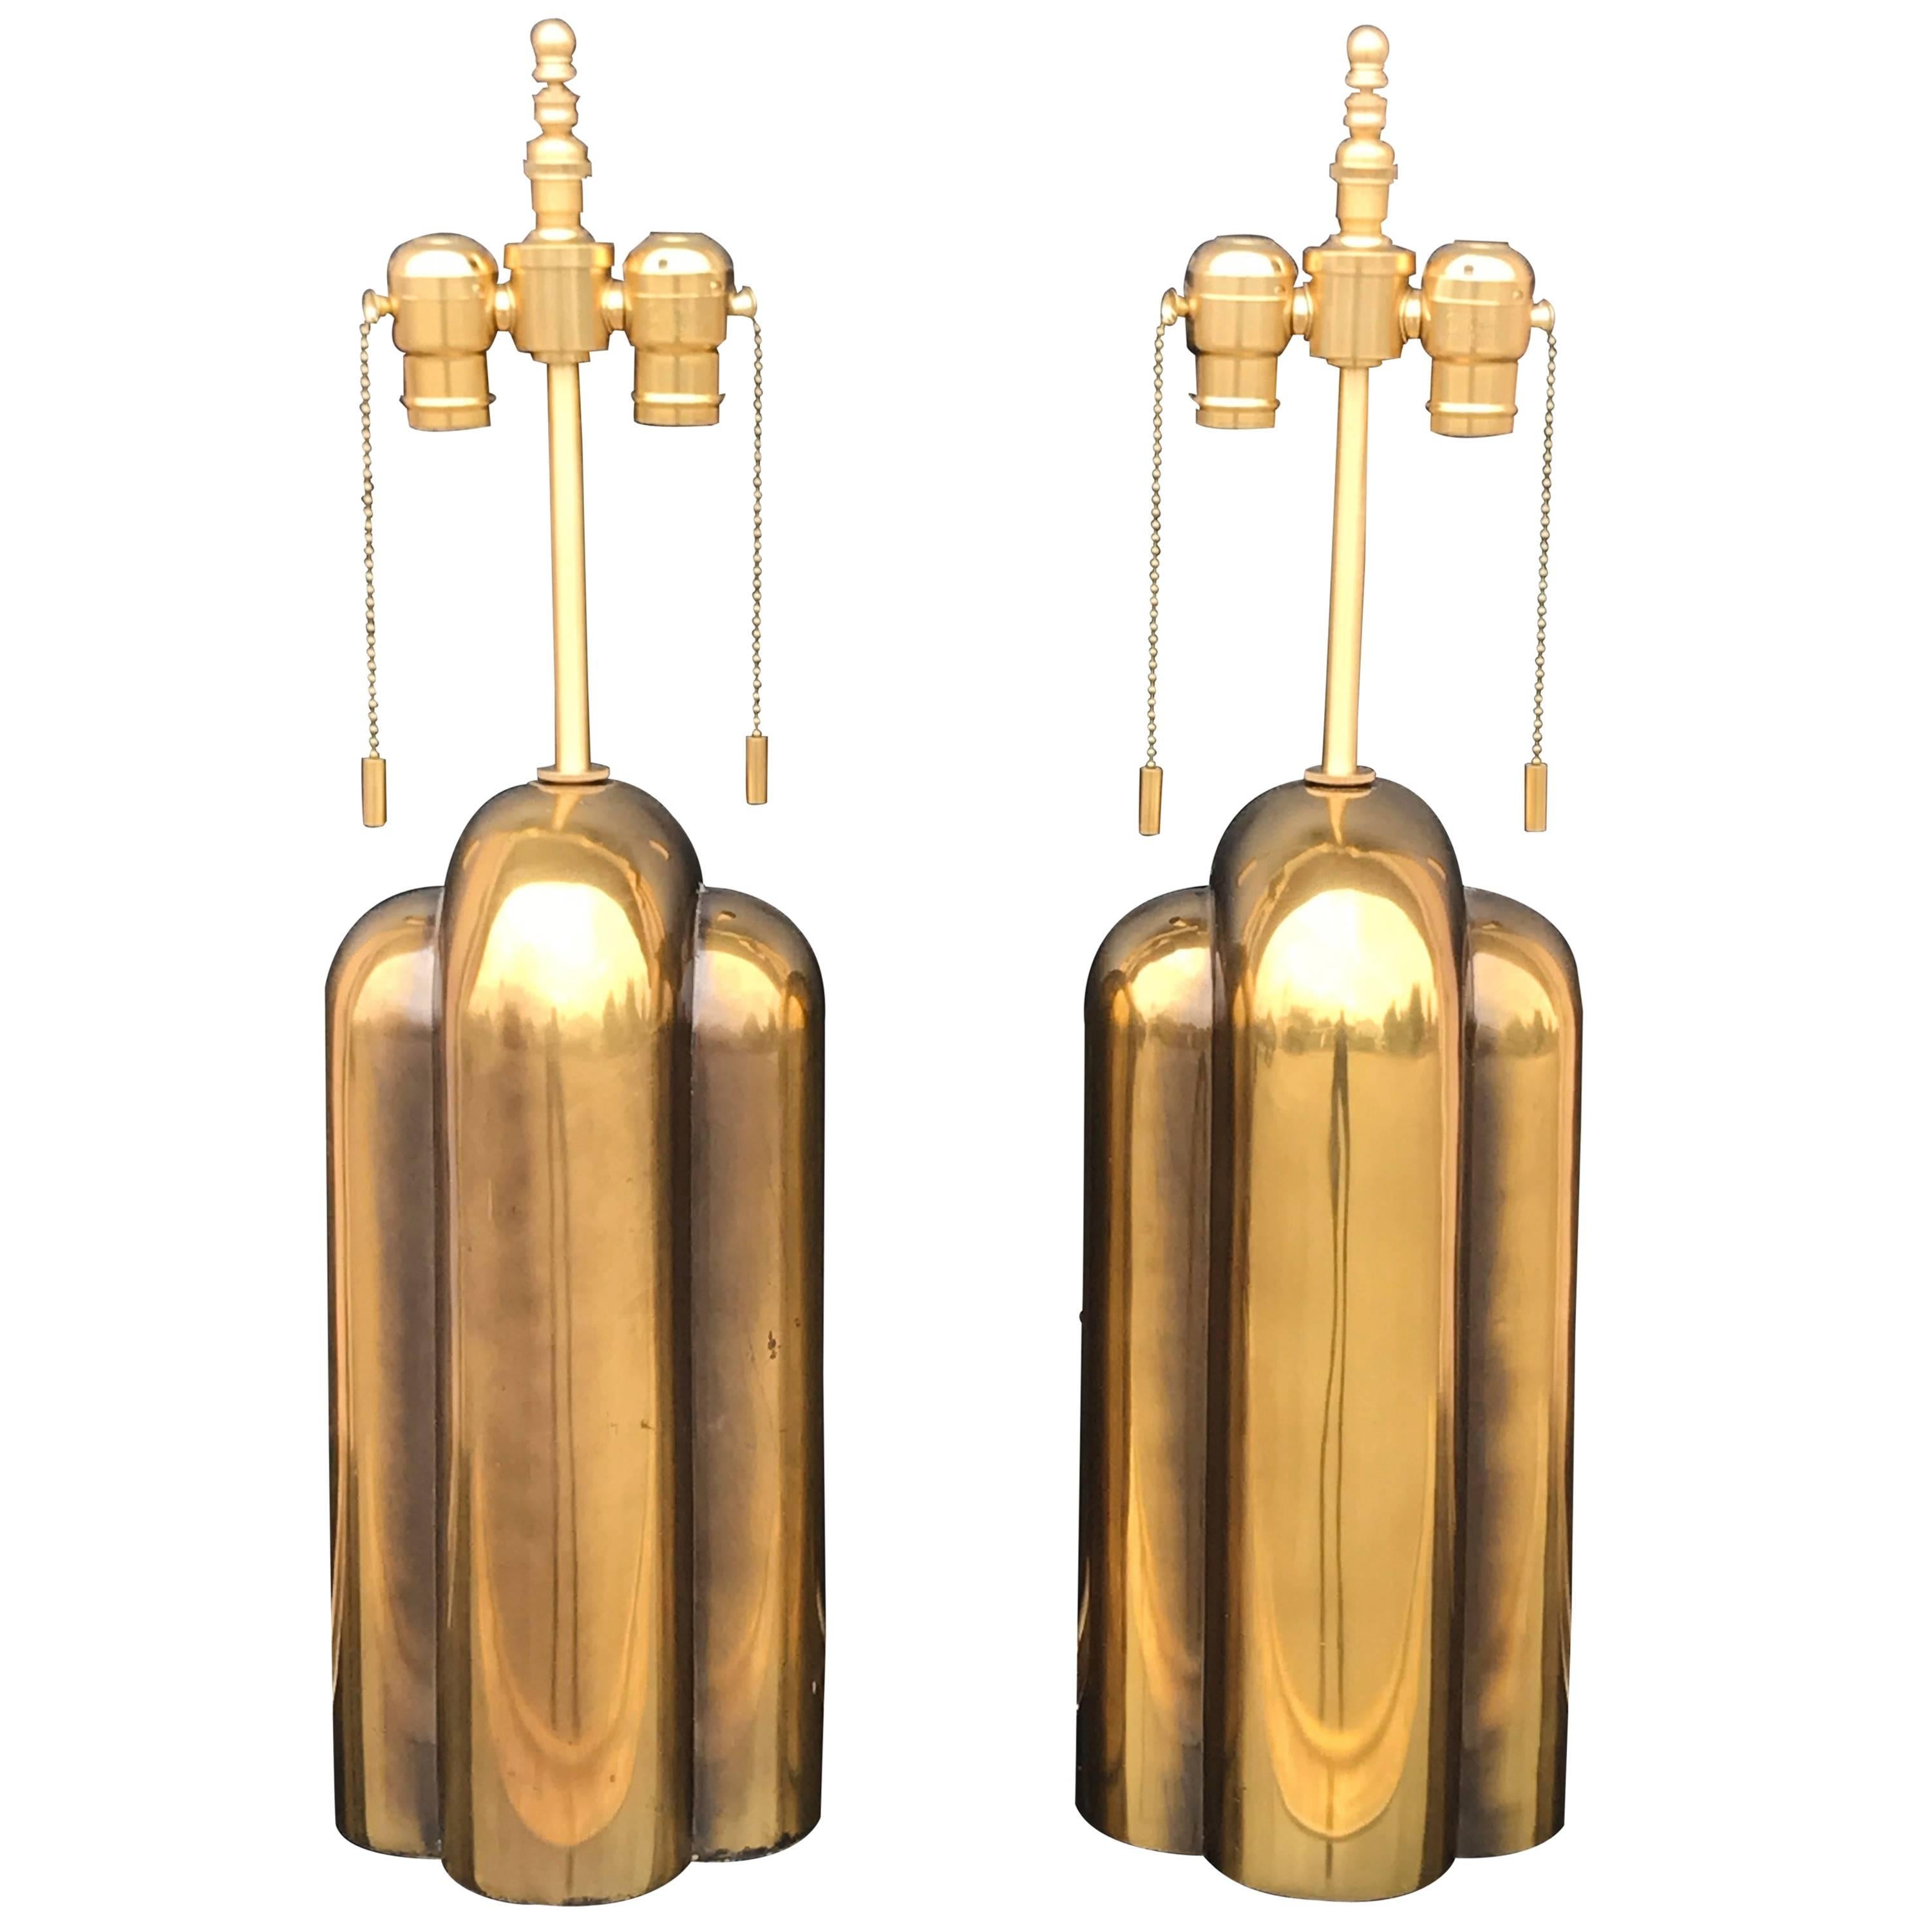 Pair of Patinated Brass Art Deco Style Lamps by Westwood